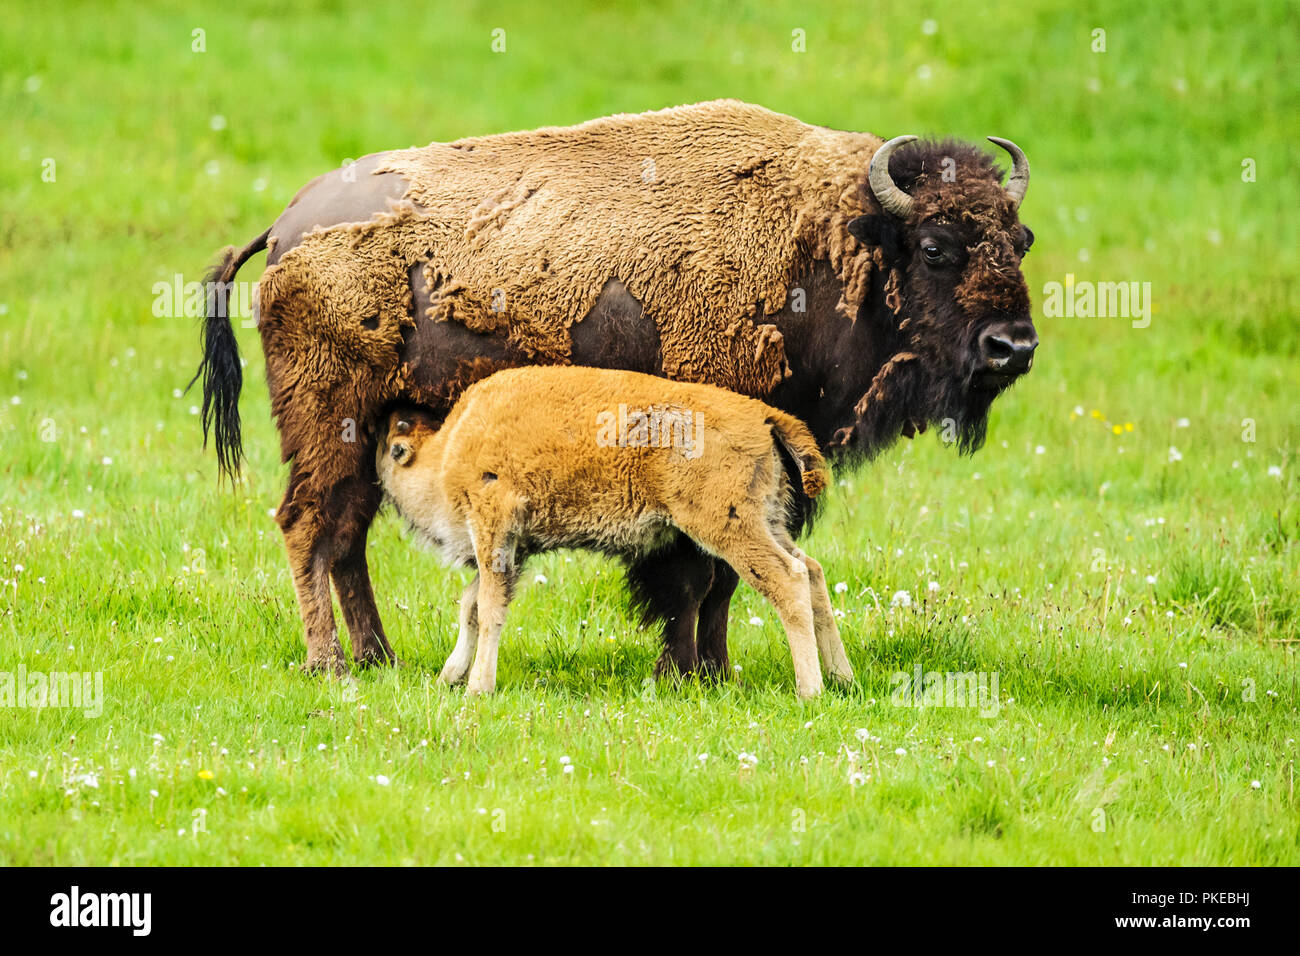 Bison nursing it's young, Yellowstone National Park; Wyoming, United States of America Stock Photo